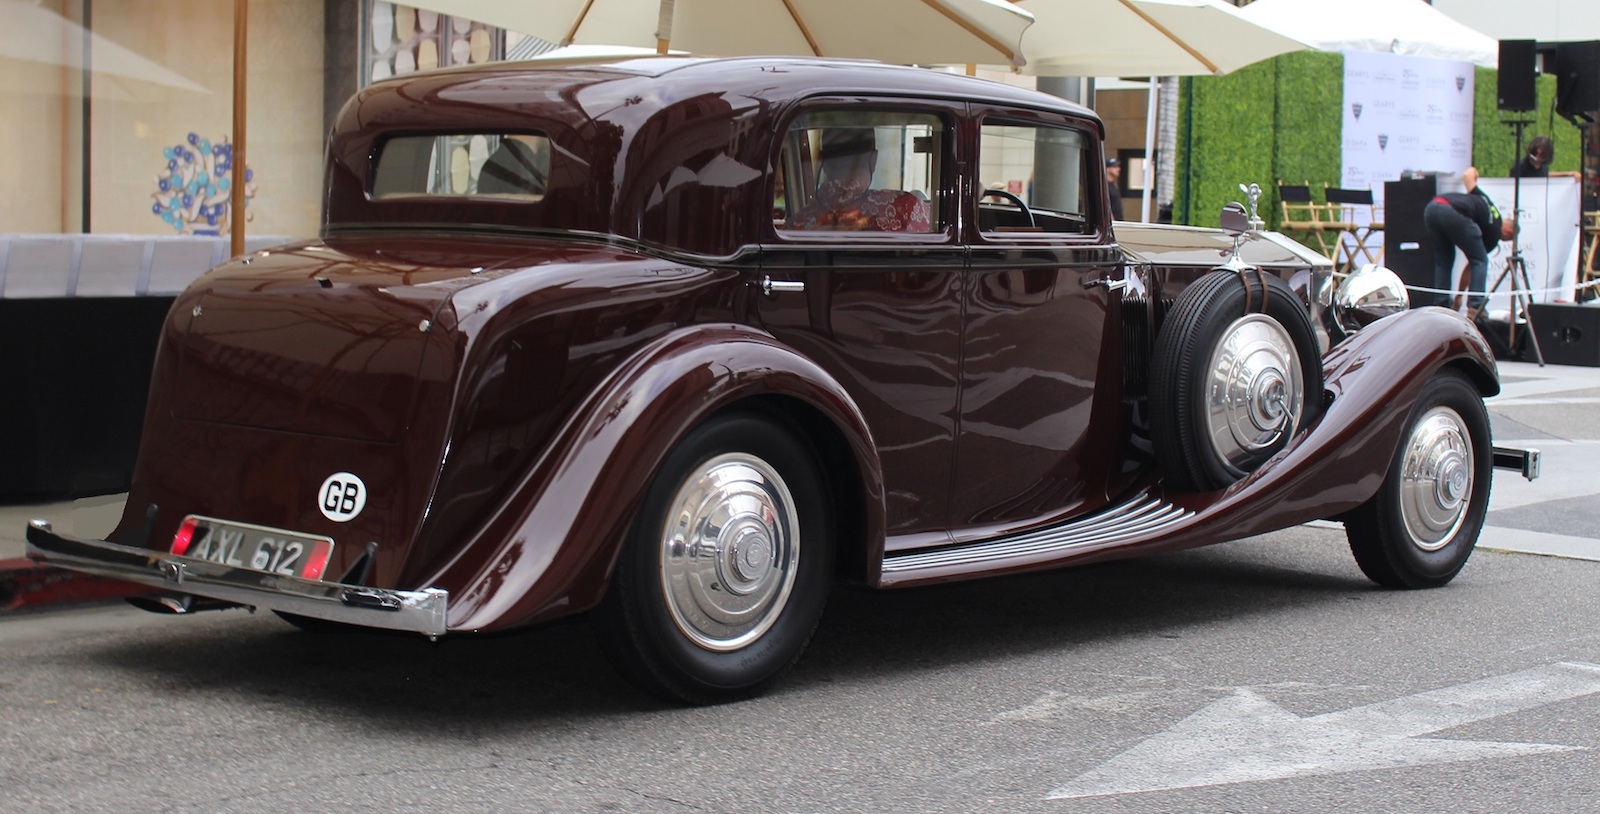 A Bit Of History - This Rolls Royce